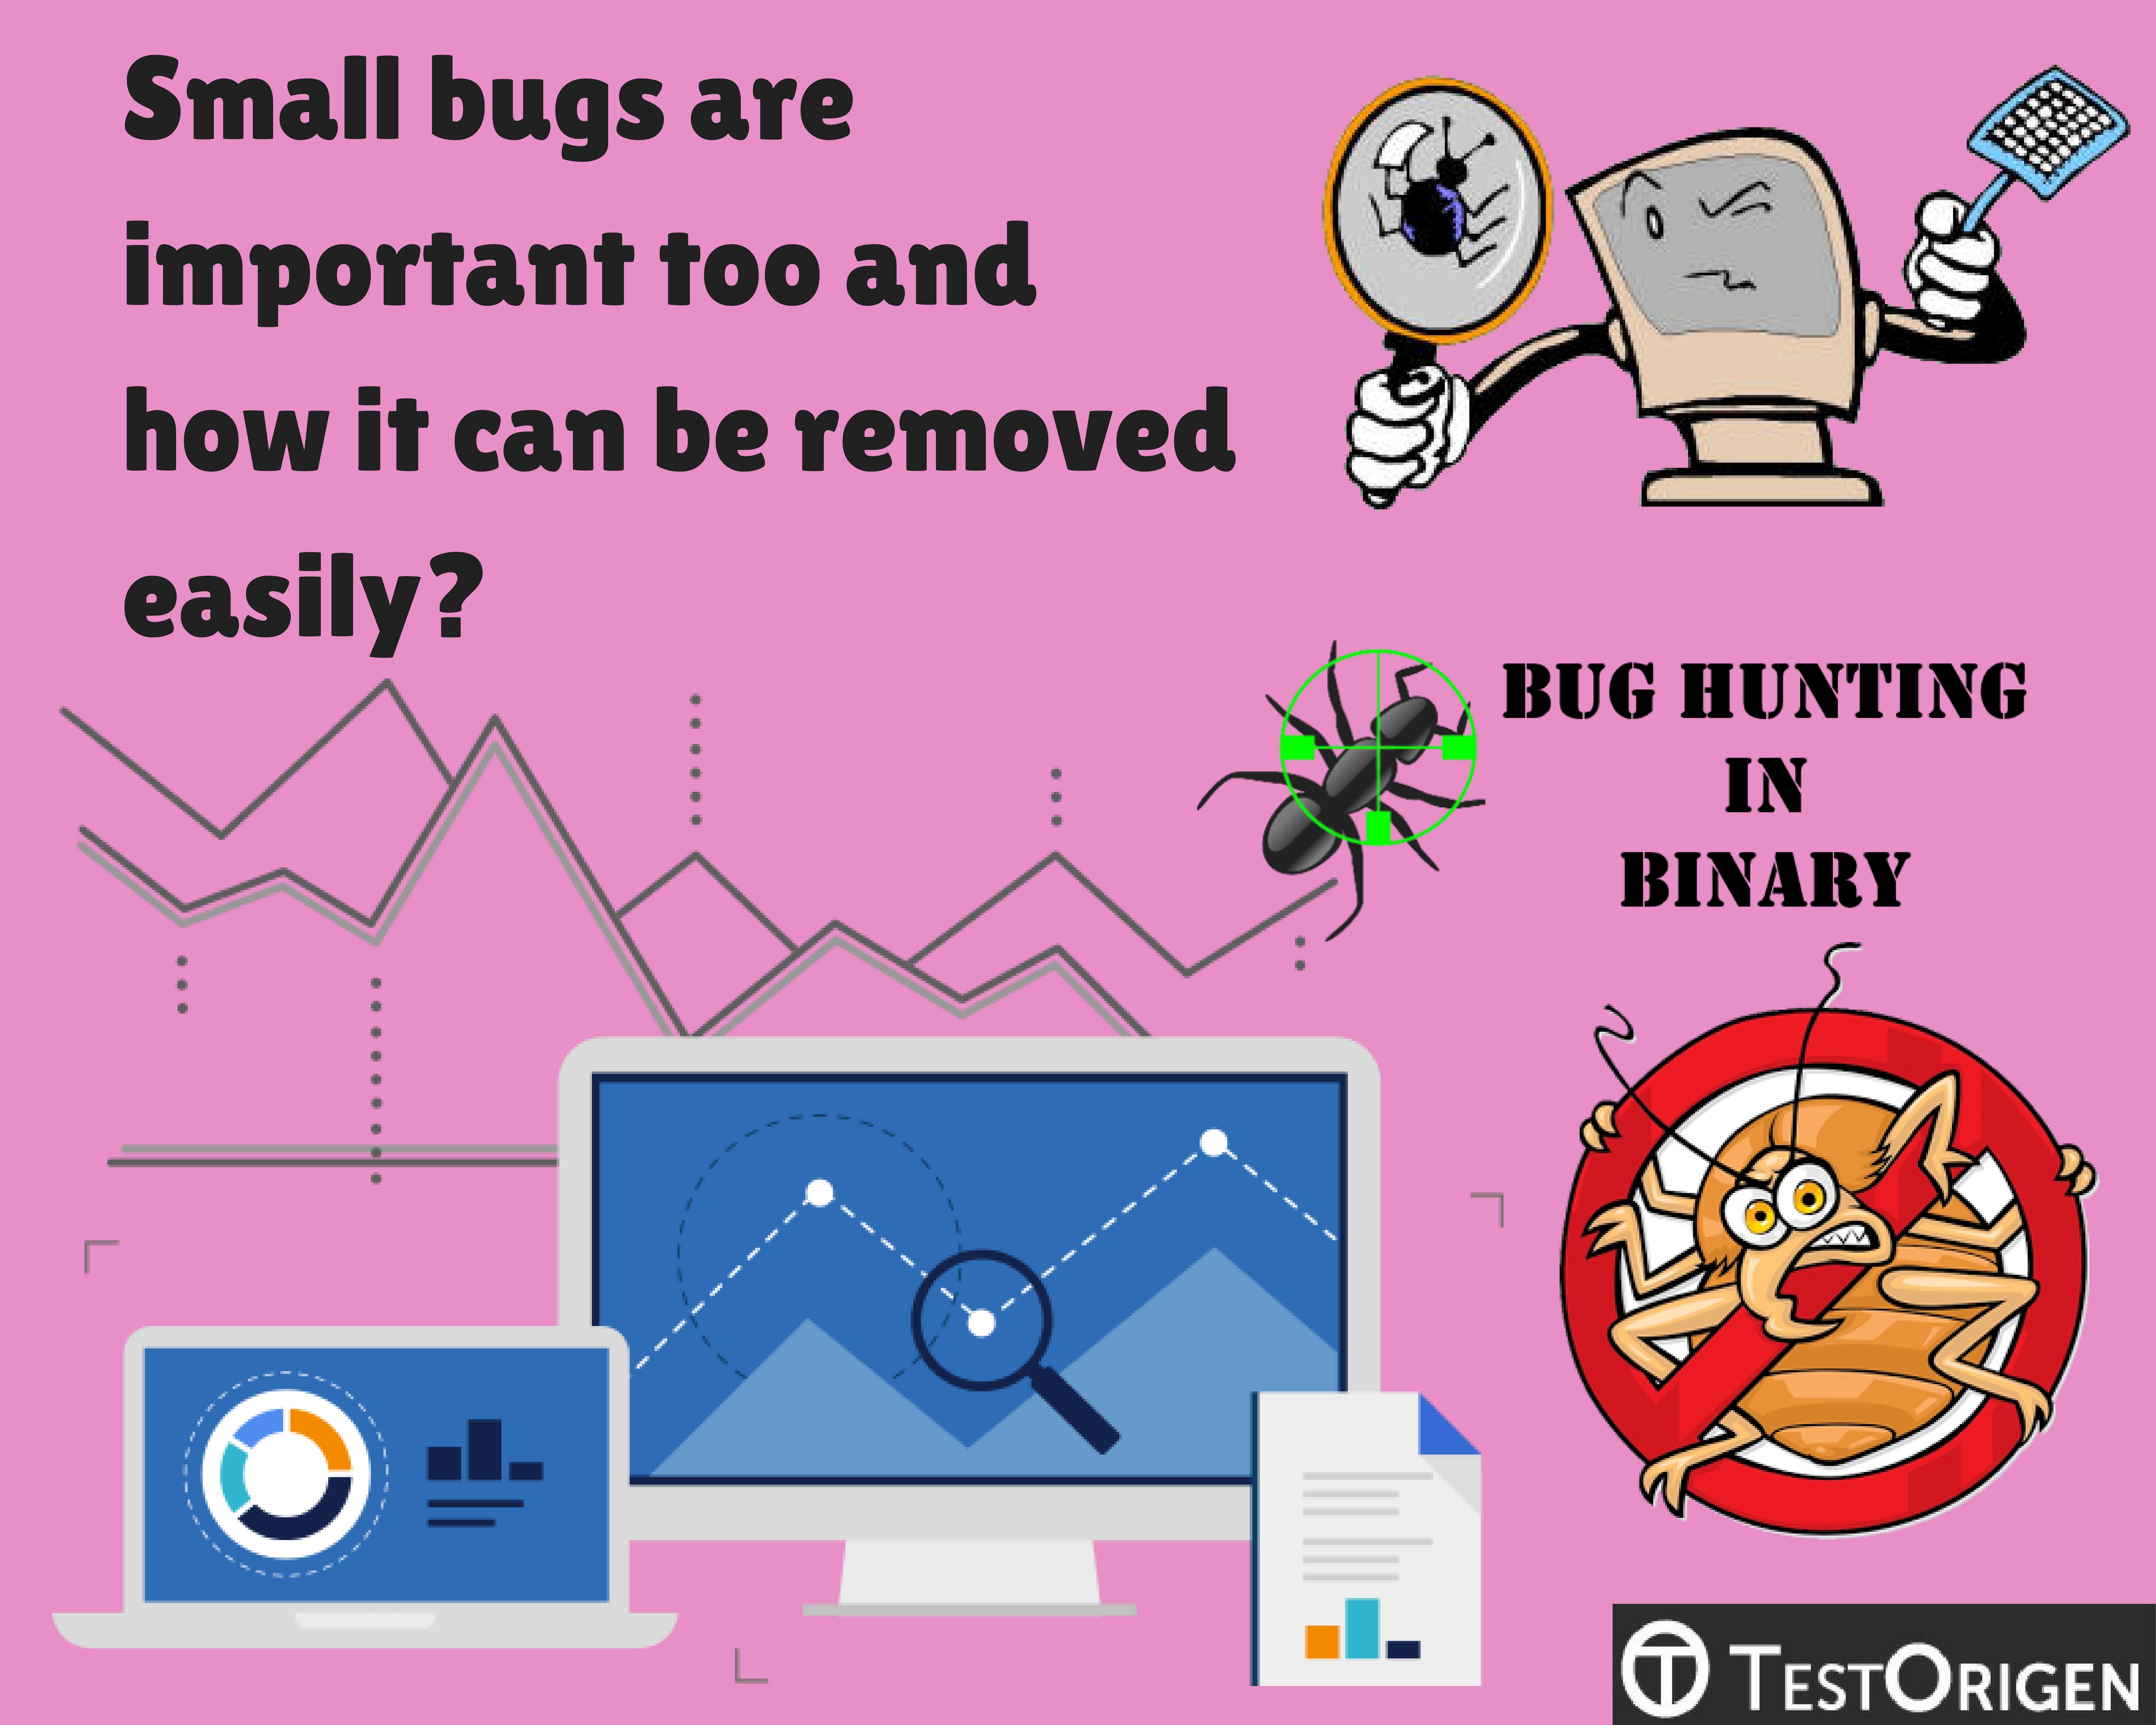 Small bugs are important too and how it can be removed easily?